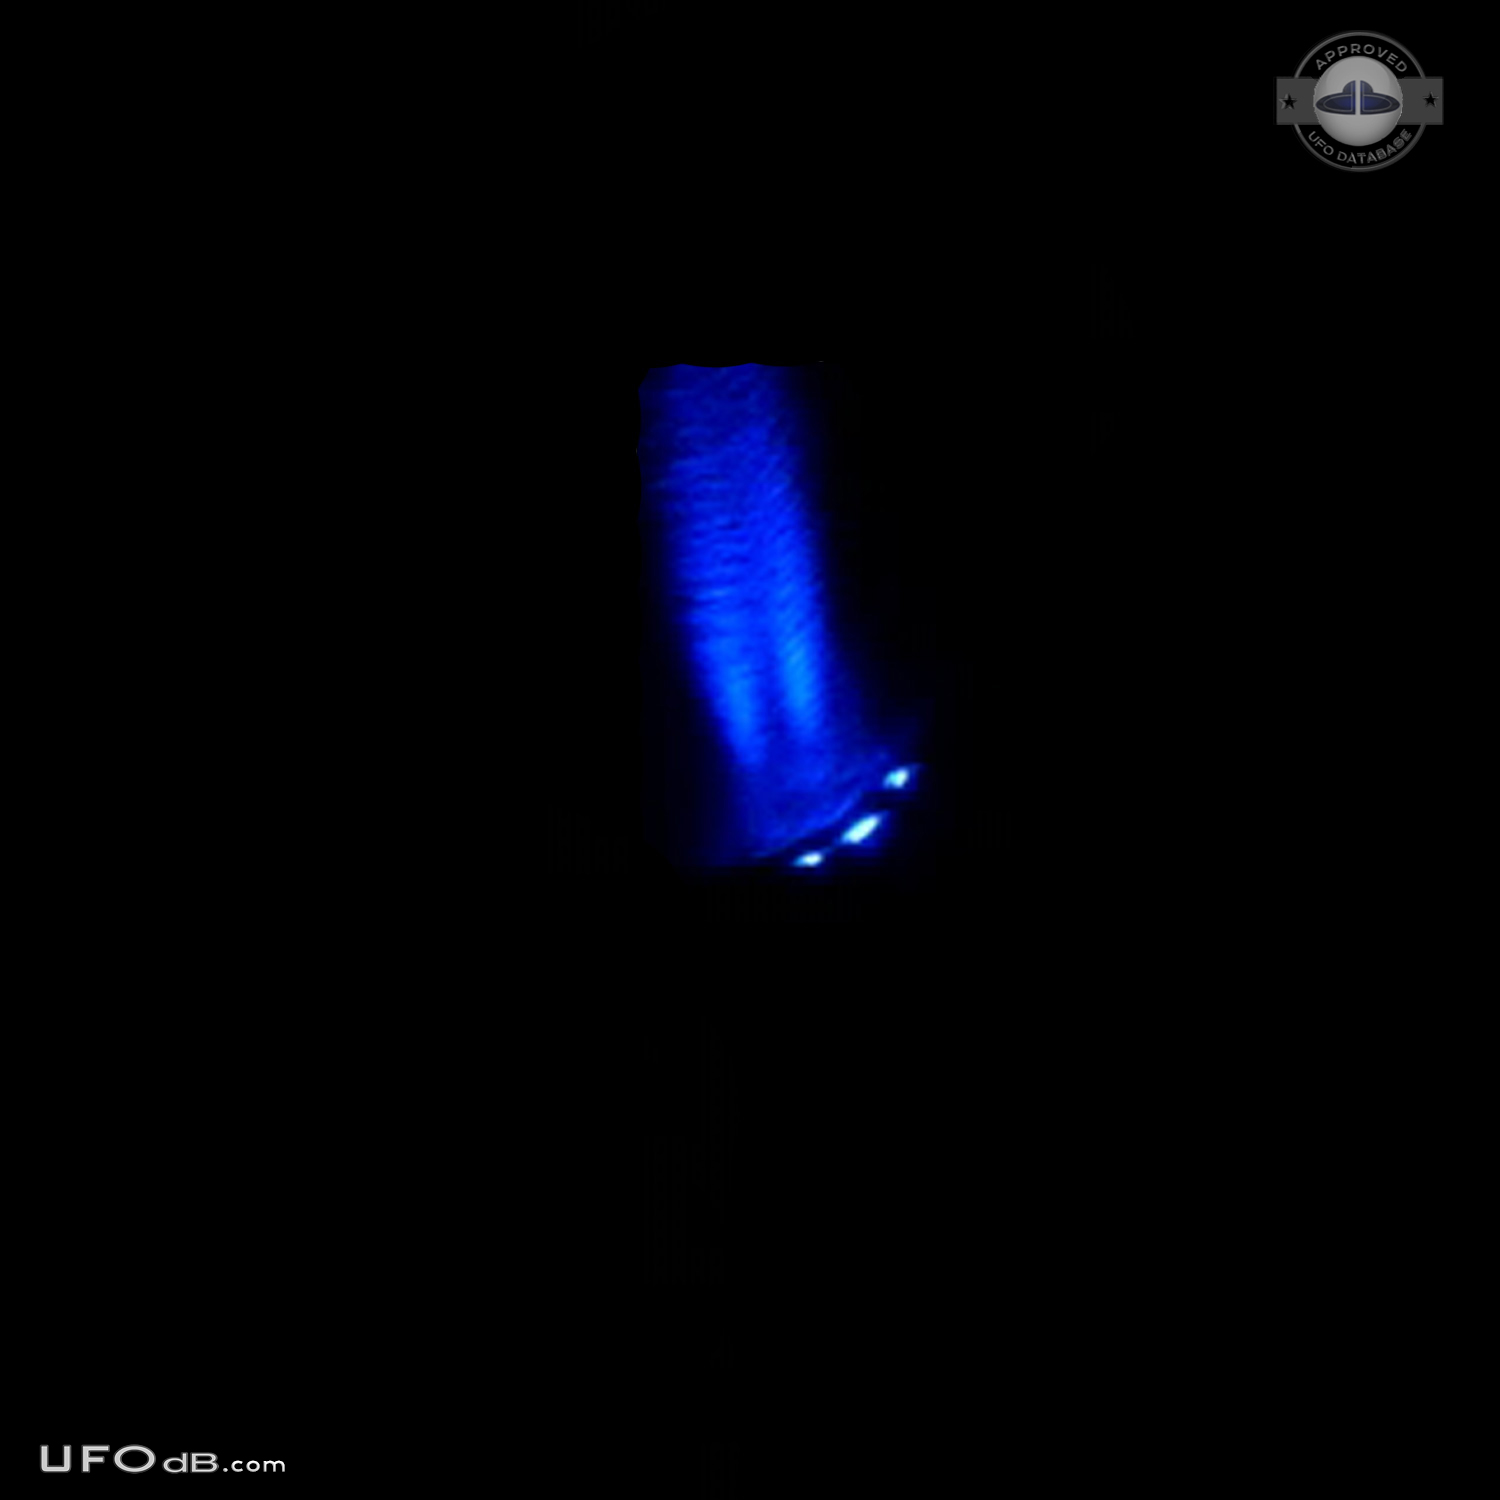 Incredible UFO images taken from video - Pipestone, Minnesota - 2012 UFO Picture #536-1